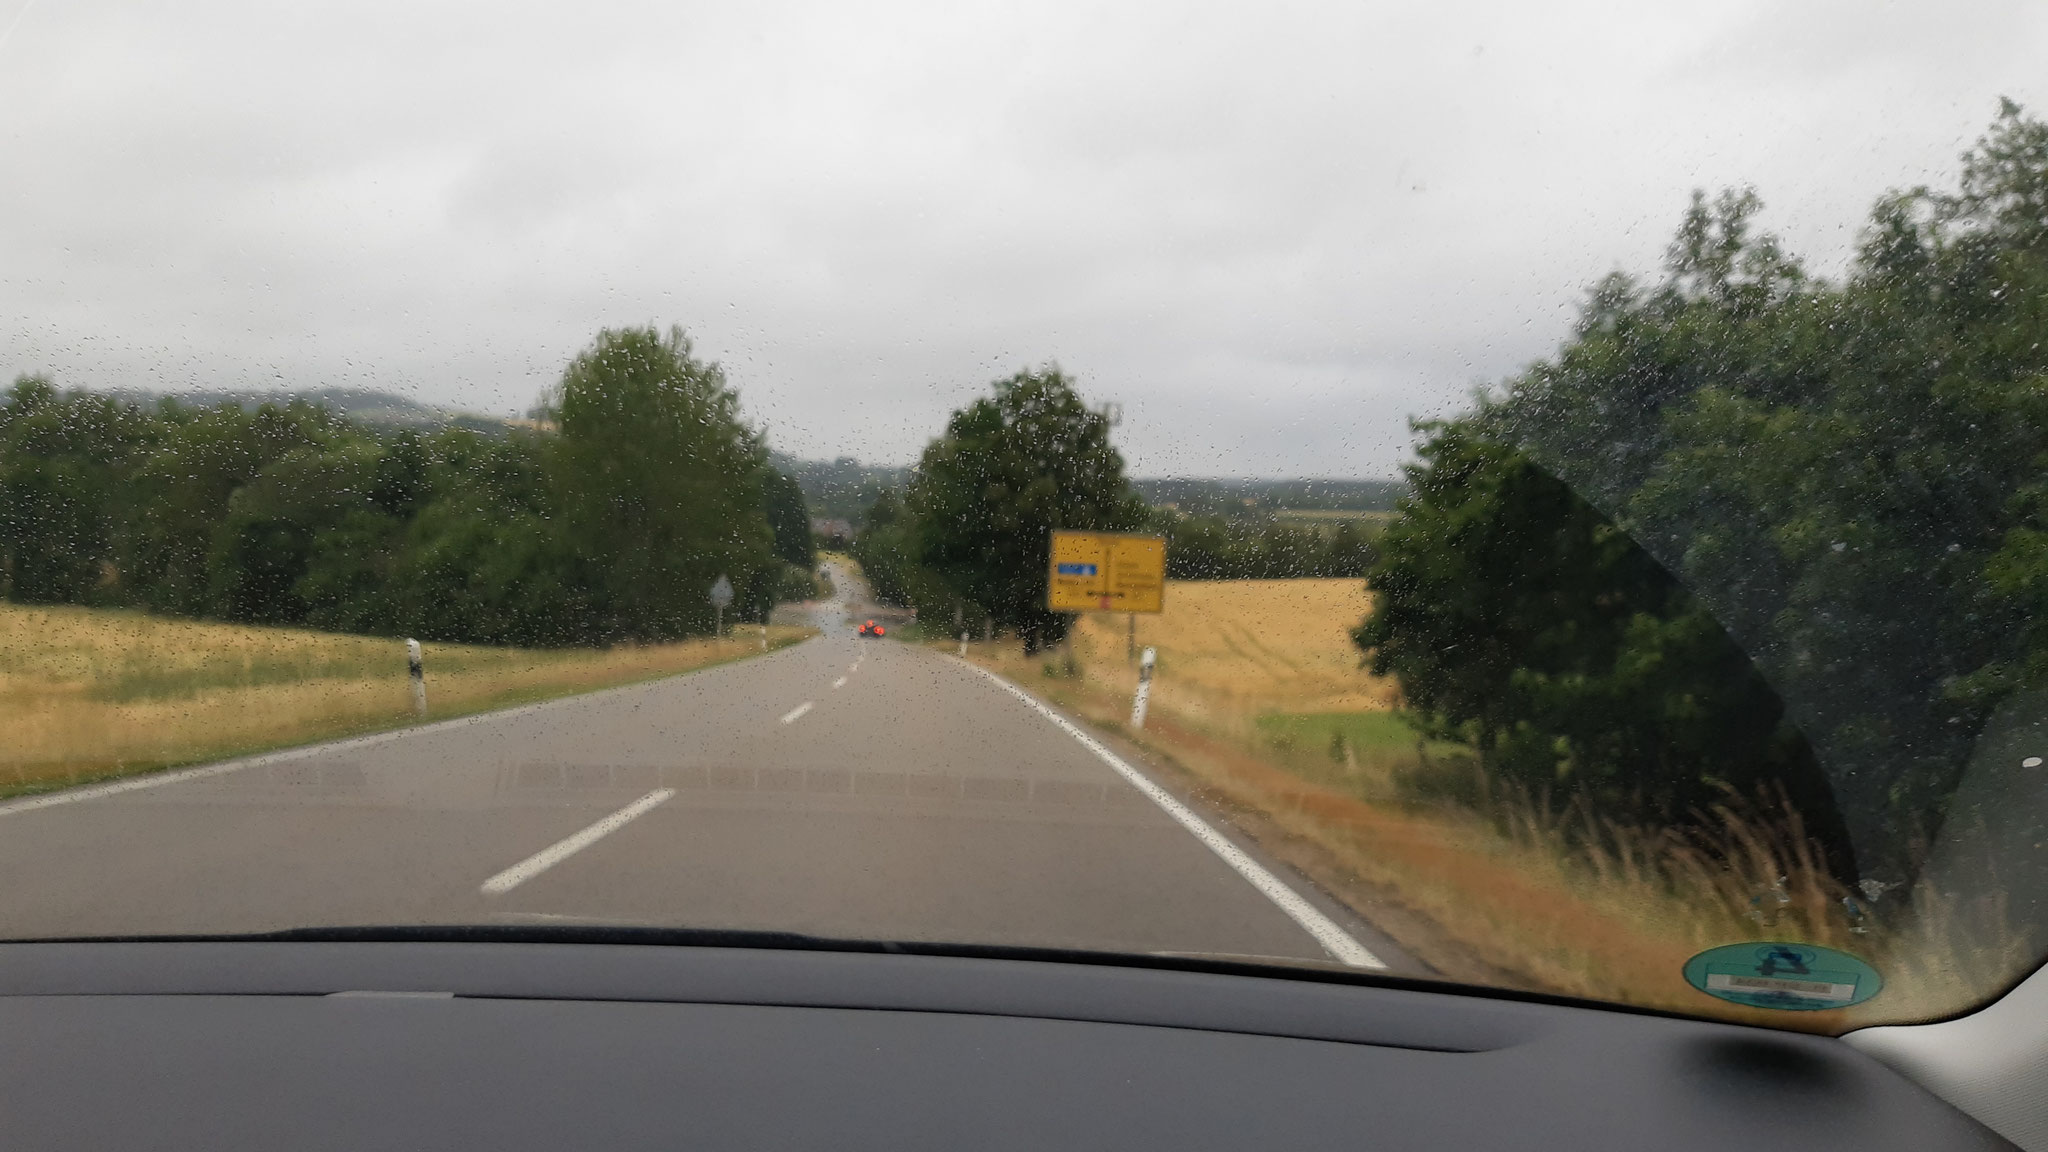 On the road to Oberviechtach